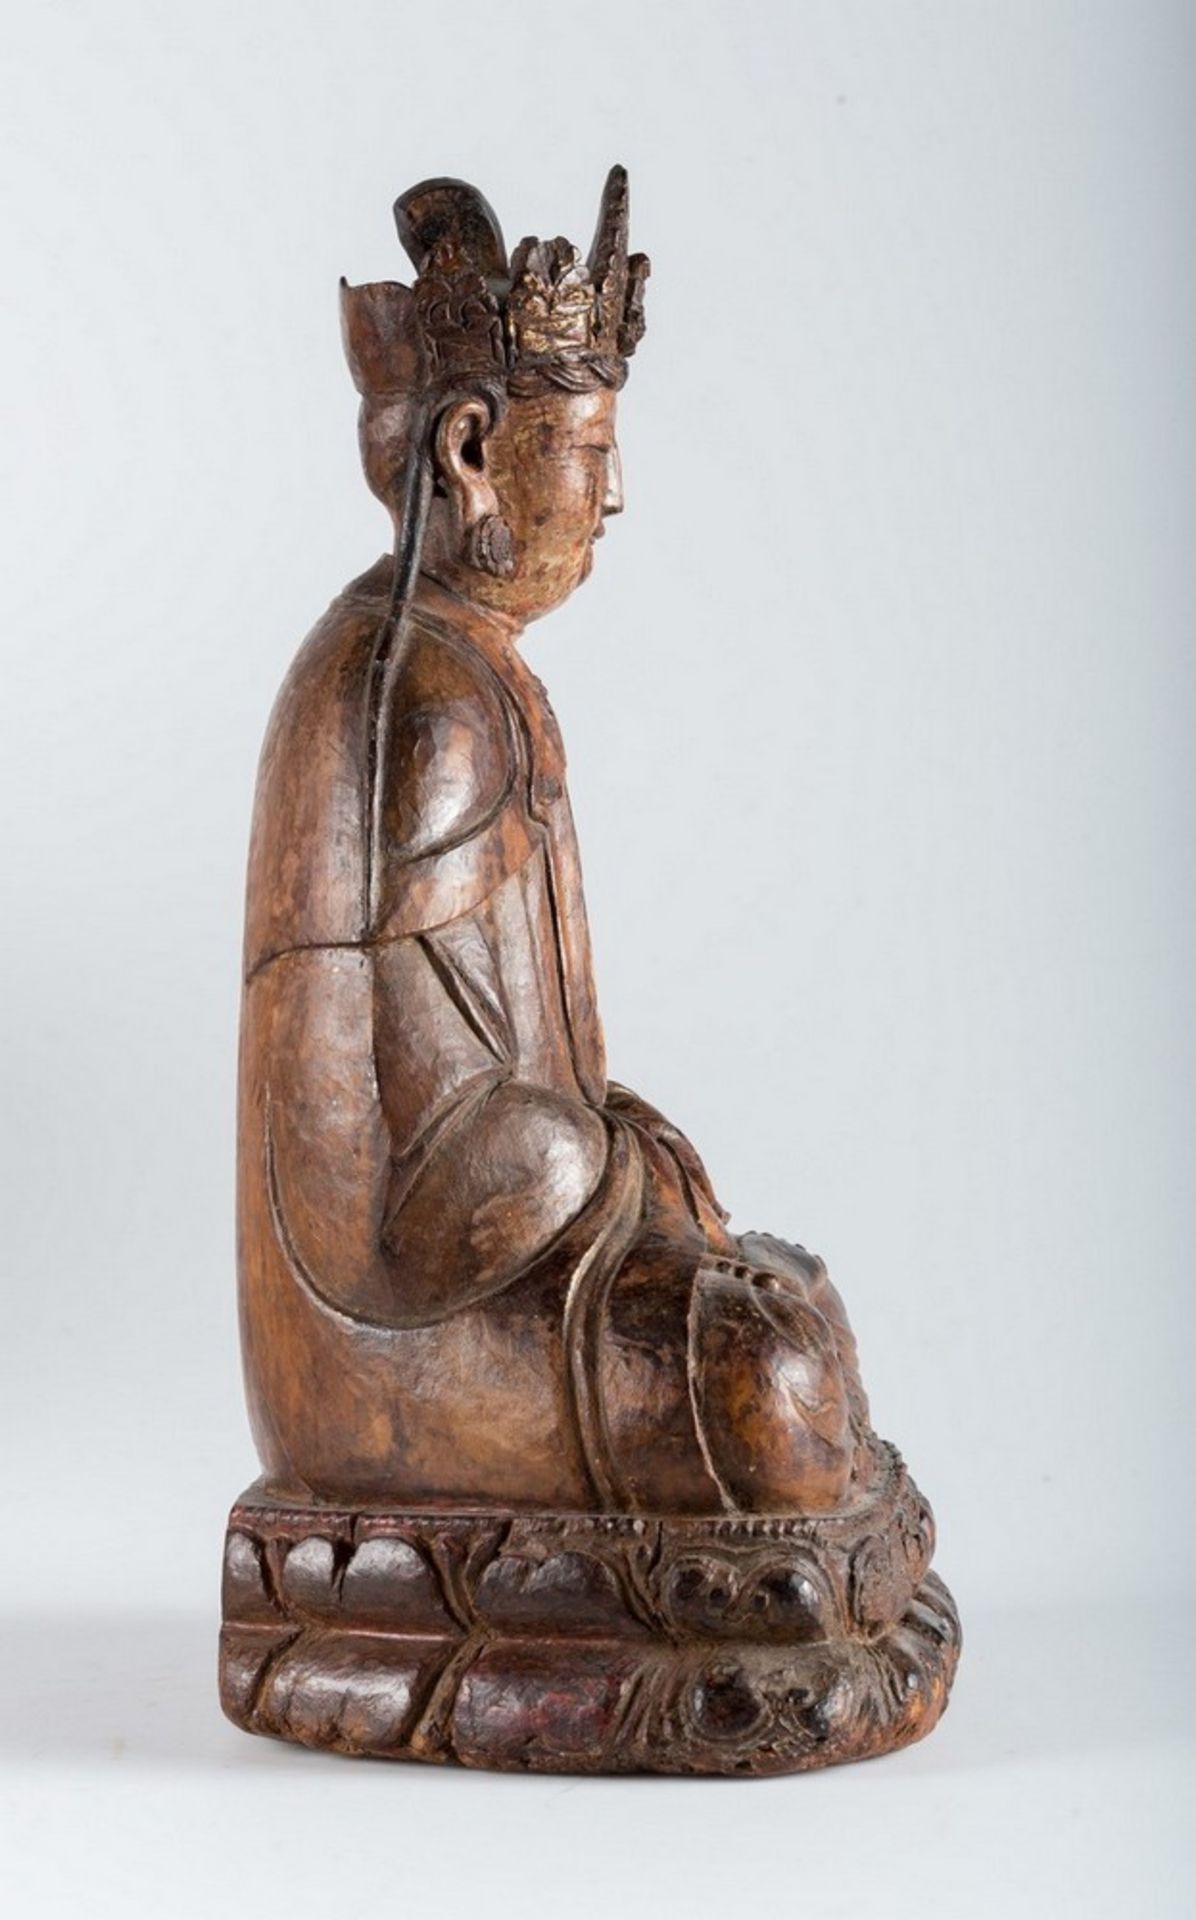 Arte Cinese A hardwood sculpture of Guanyin China, Yuan dynasty, 1279 - 1368. - Image 4 of 7